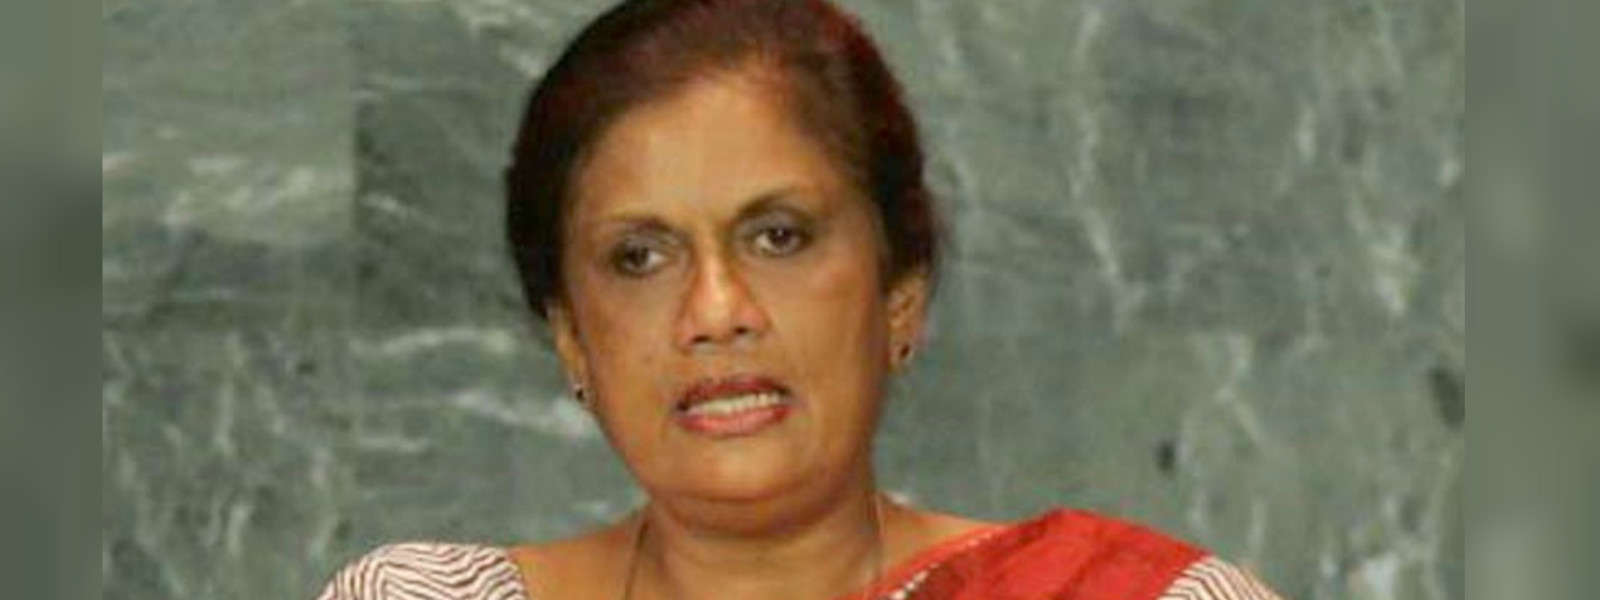 "SLFP had no tradition of looting from the public"